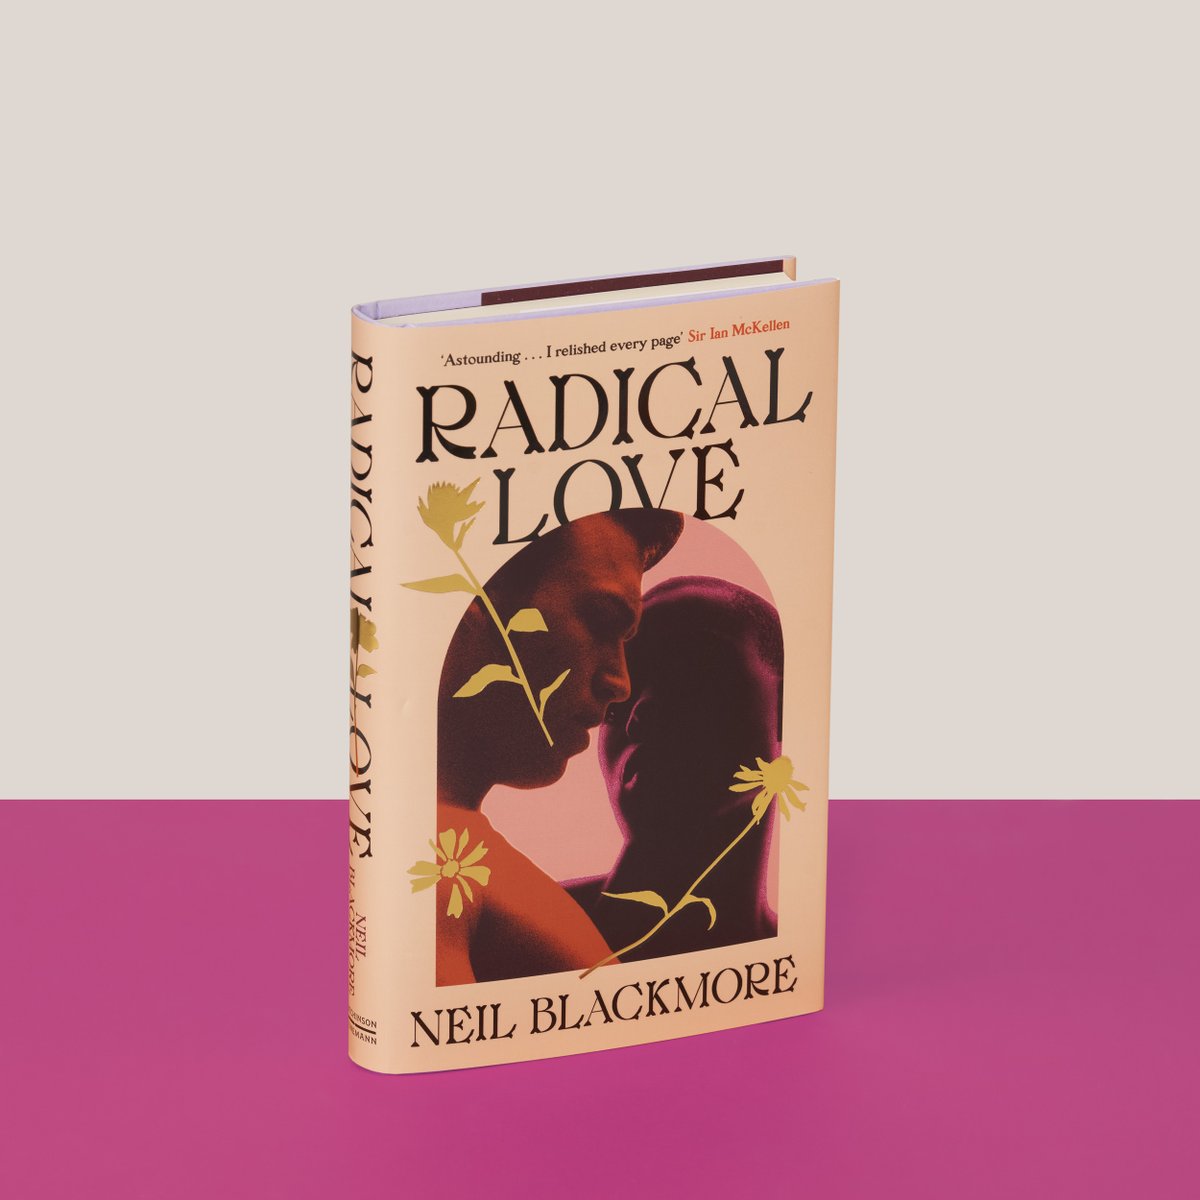 Based on the true story of John Church, England's first known gay minister, #RadicalLove by Neil Blackmore is an incredible work of historical fiction, centring LGBTQ+ stories – and the injustice of their oppression – in the heart of the Regency period: bit.ly/469iK6t